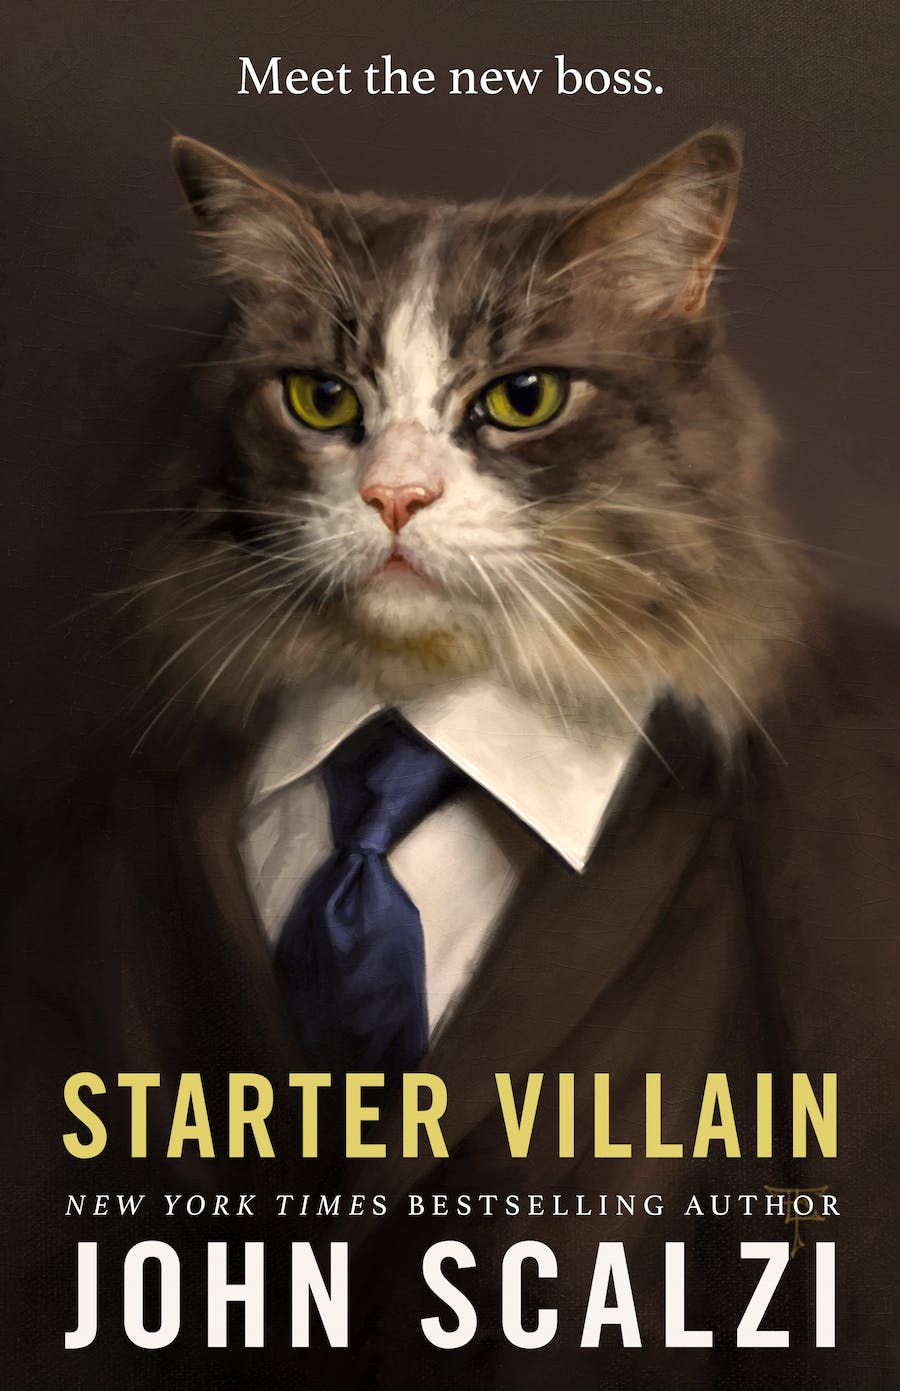 Cover art for John Scalzi’s Starter Villain, which features an adorable cat wearing a suit and tie with the caption “Meet the new boss.”